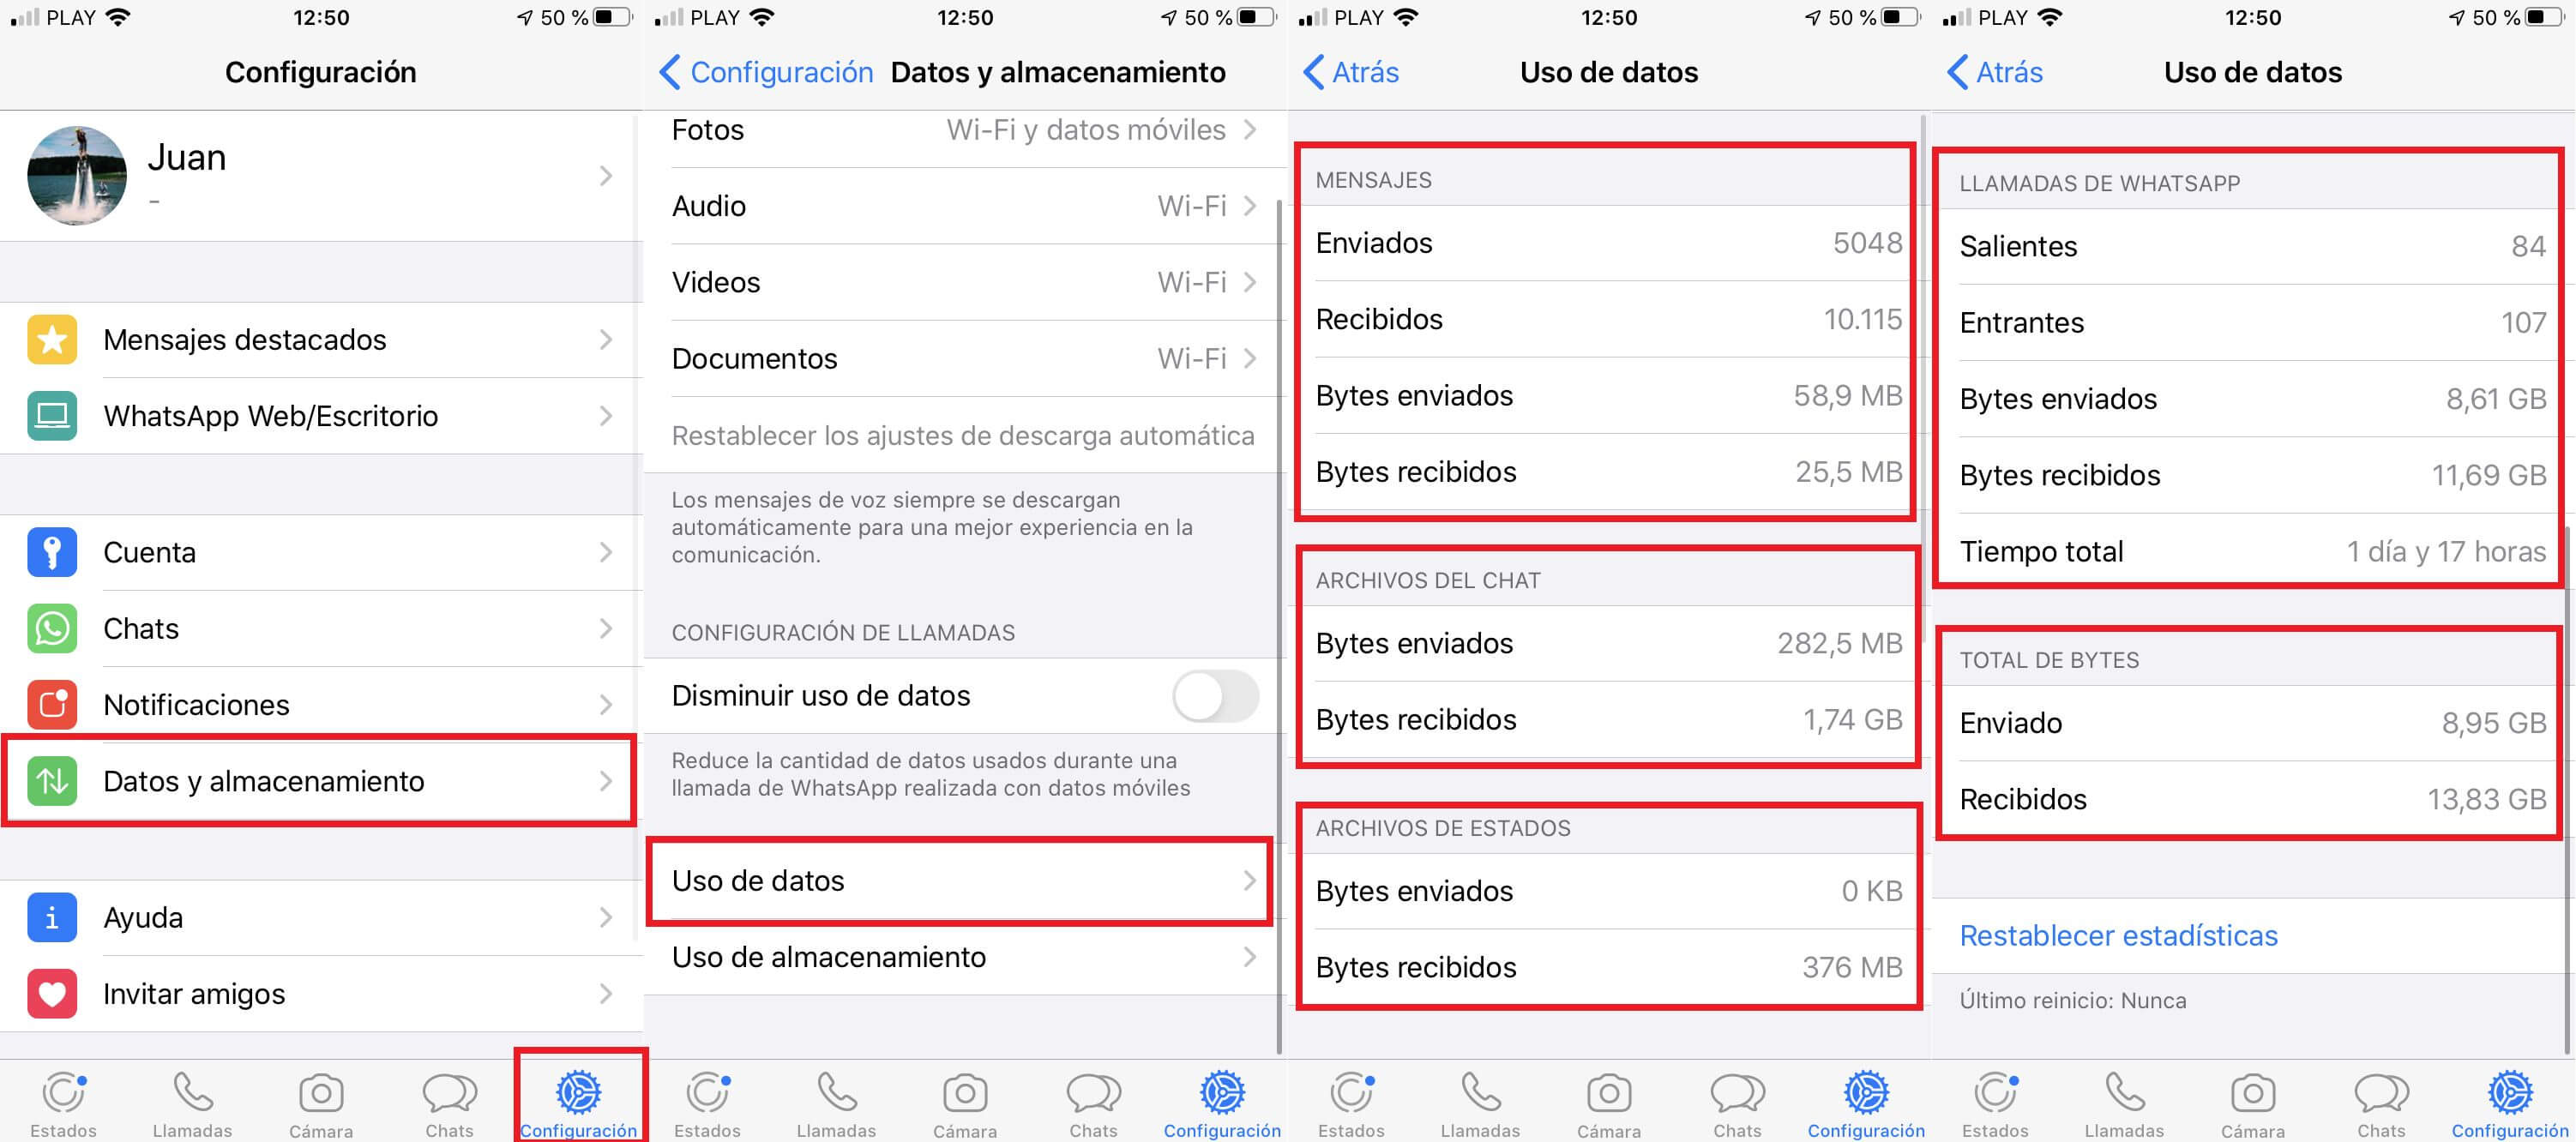 How much data does WhatsApp consume on my iPhone or Android?